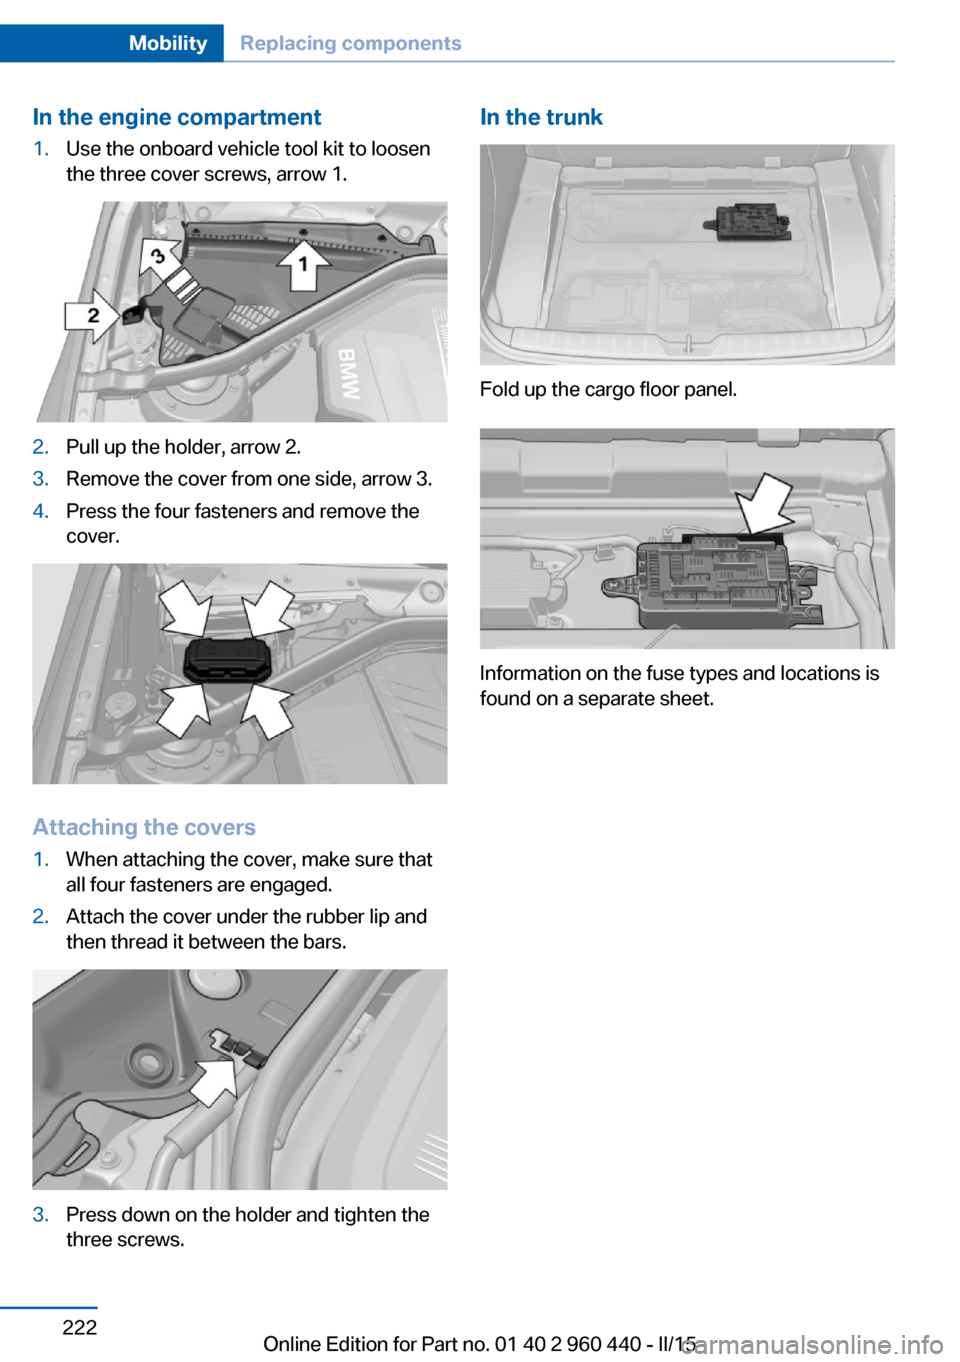 BMW 3 SERIES SEDAN 2016 F30 Owners Manual In the engine compartment1.Use the onboard vehicle tool kit to loosen
the three cover screws, arrow 1.2.Pull up the holder, arrow 2.3.Remove the cover from one side, arrow 3.4.Press the four fasteners